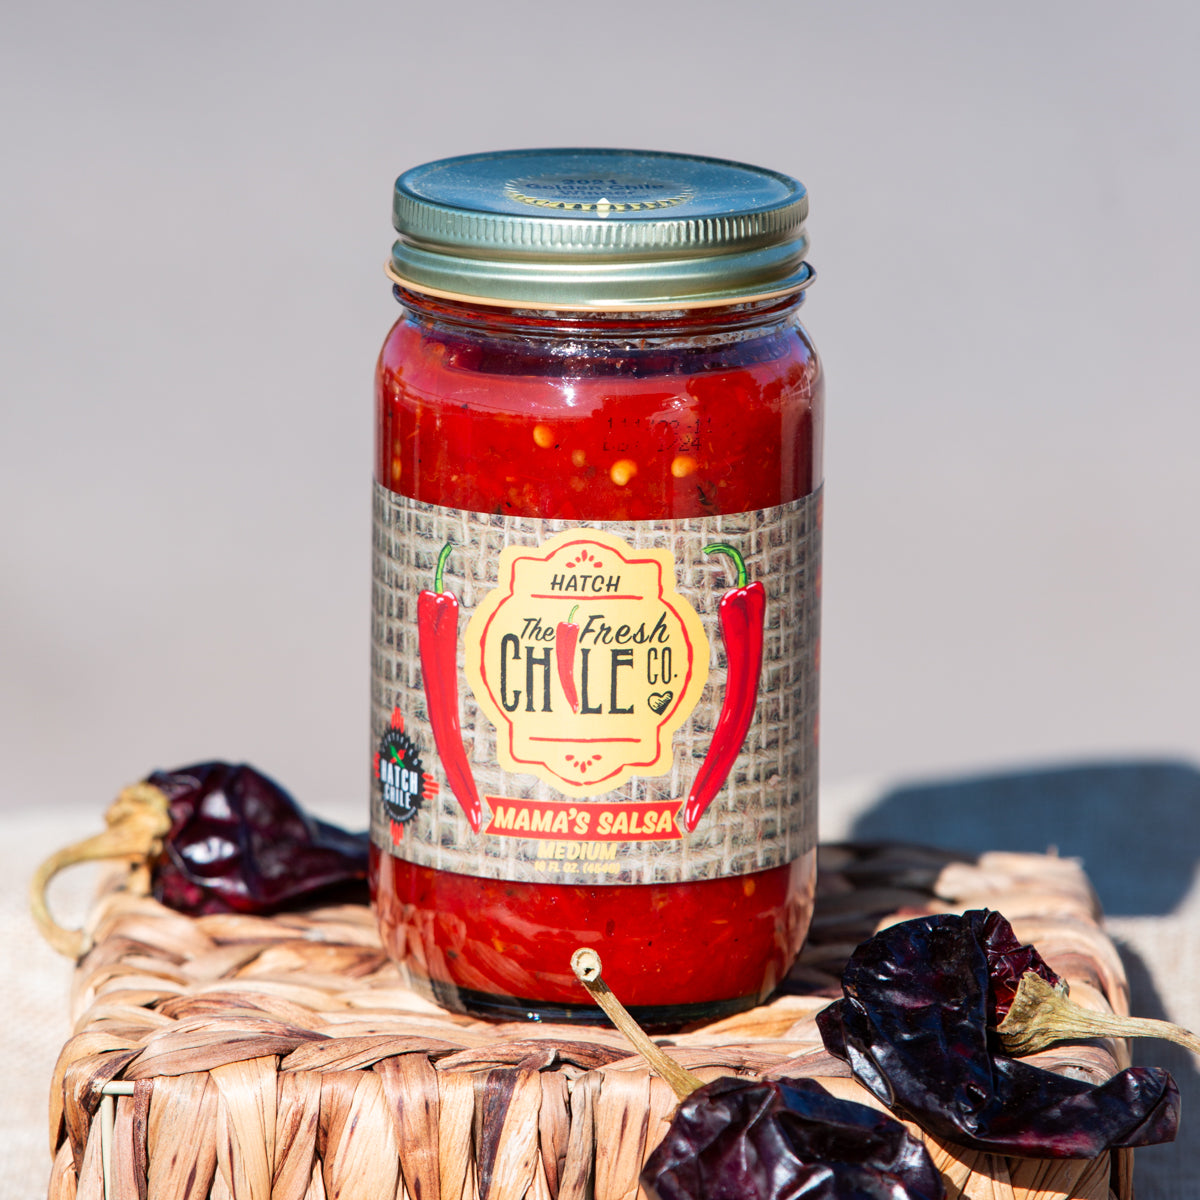 A jar of Fresh Chile Co's Mama's Blended Hatch Chile Salsa sits on a woven mat, surrounded by dried red chili peppers, with a light beige backdrop.